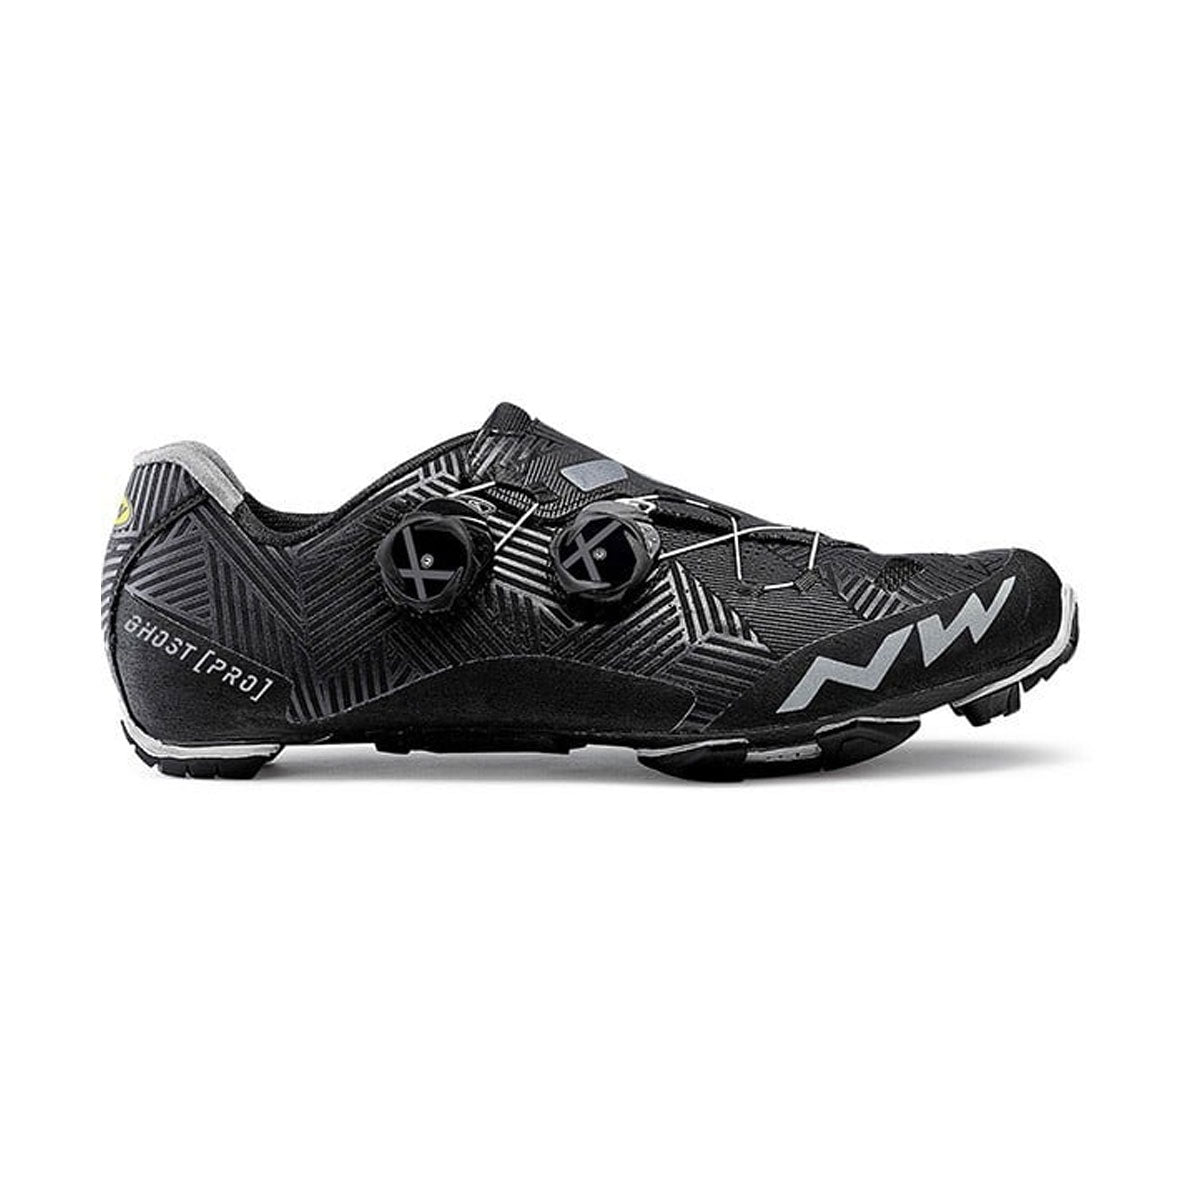 Ghost Pro MTB Shoes